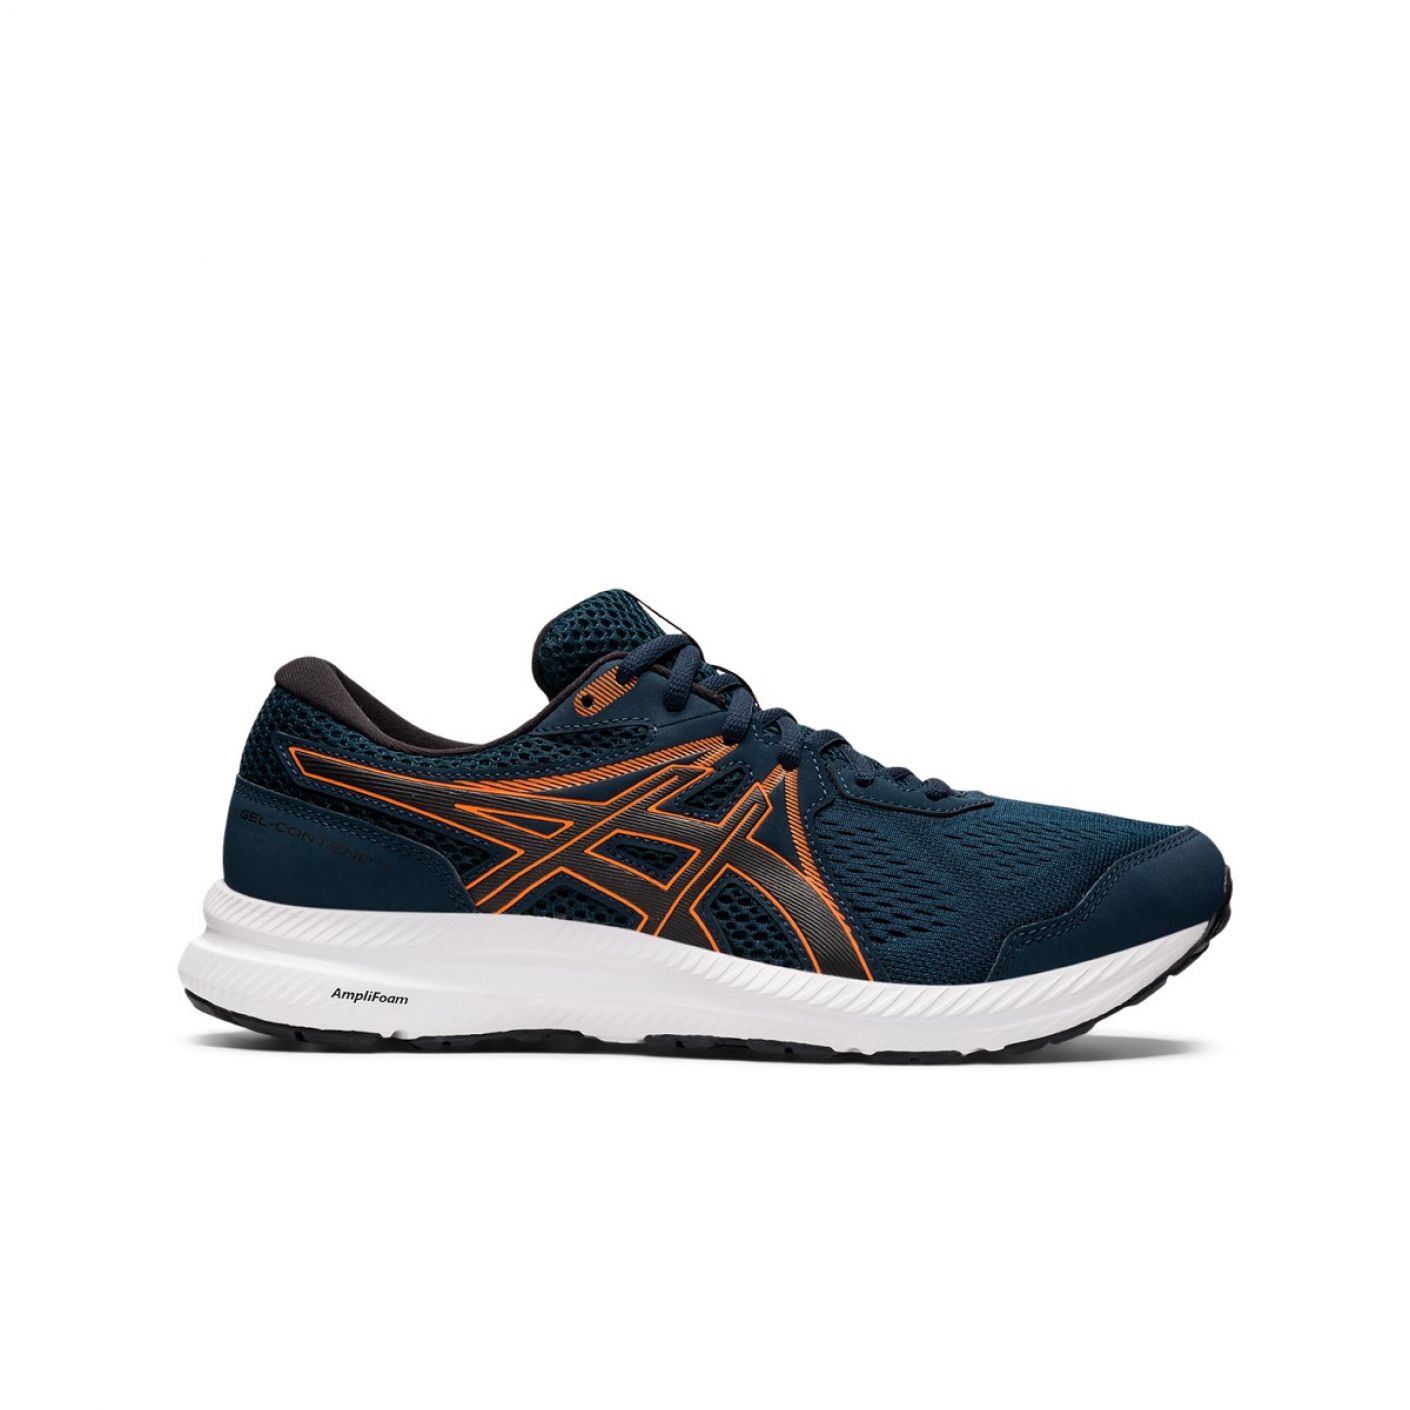 Asics Gel Contend 7 French Blue/Black